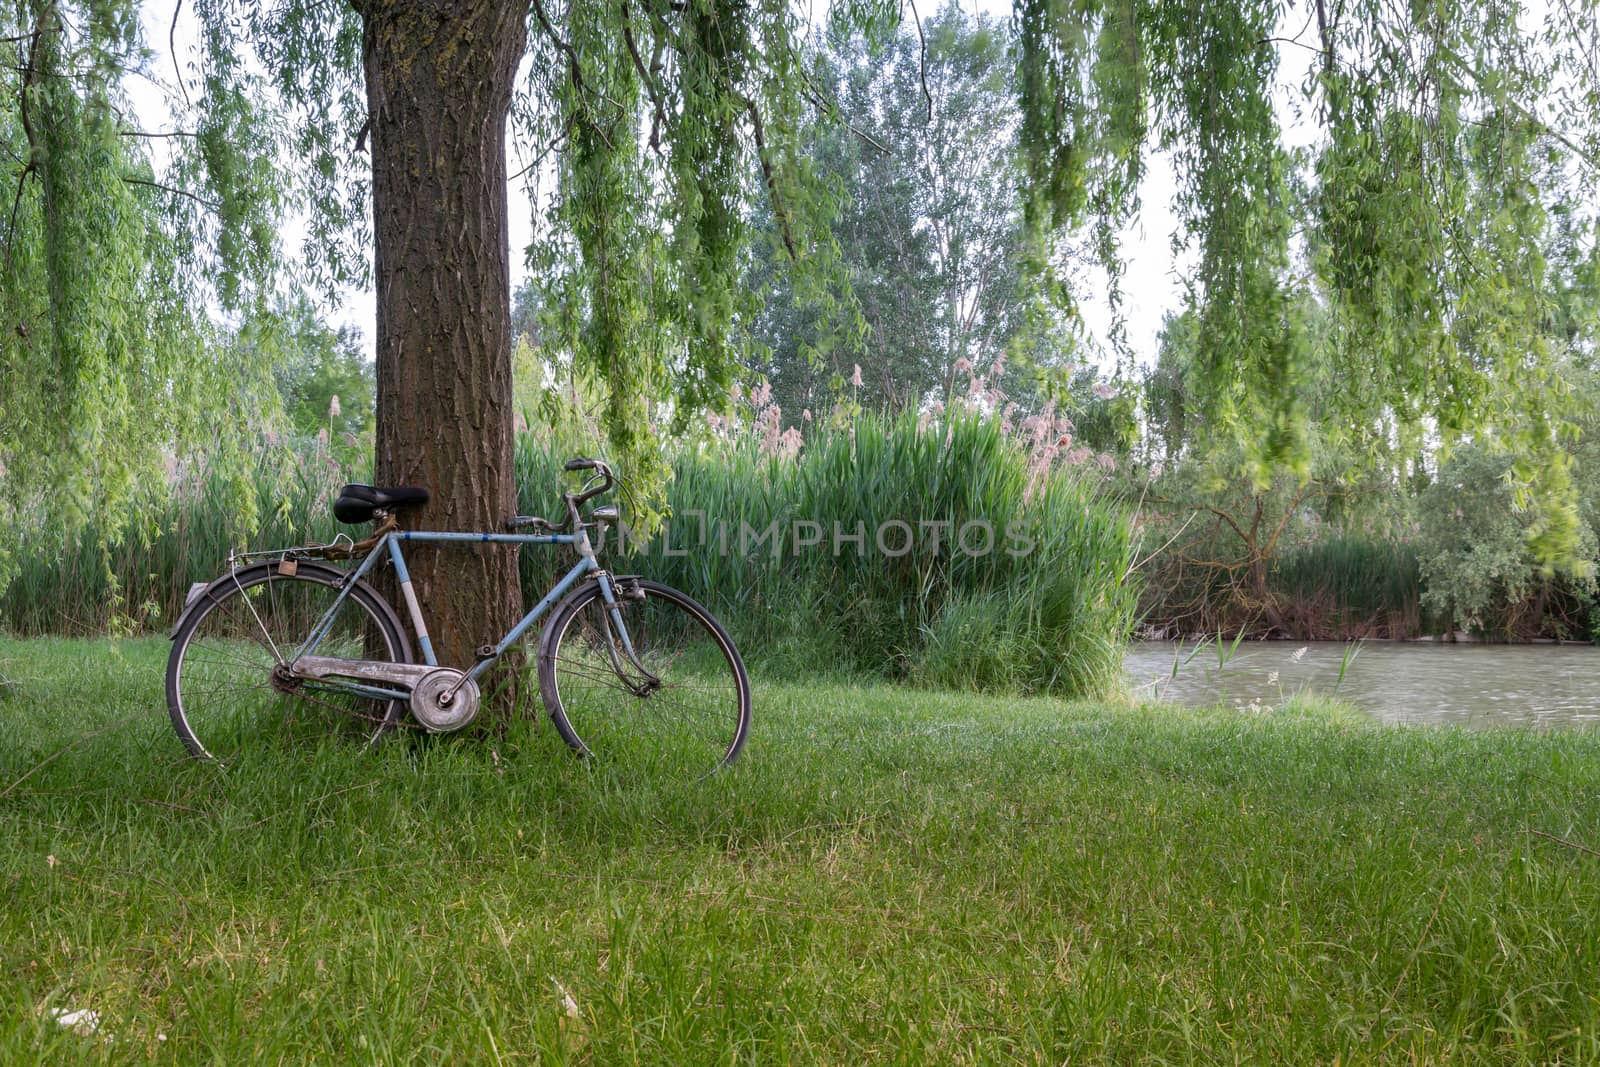 Bicycle under a tree in an italian garden